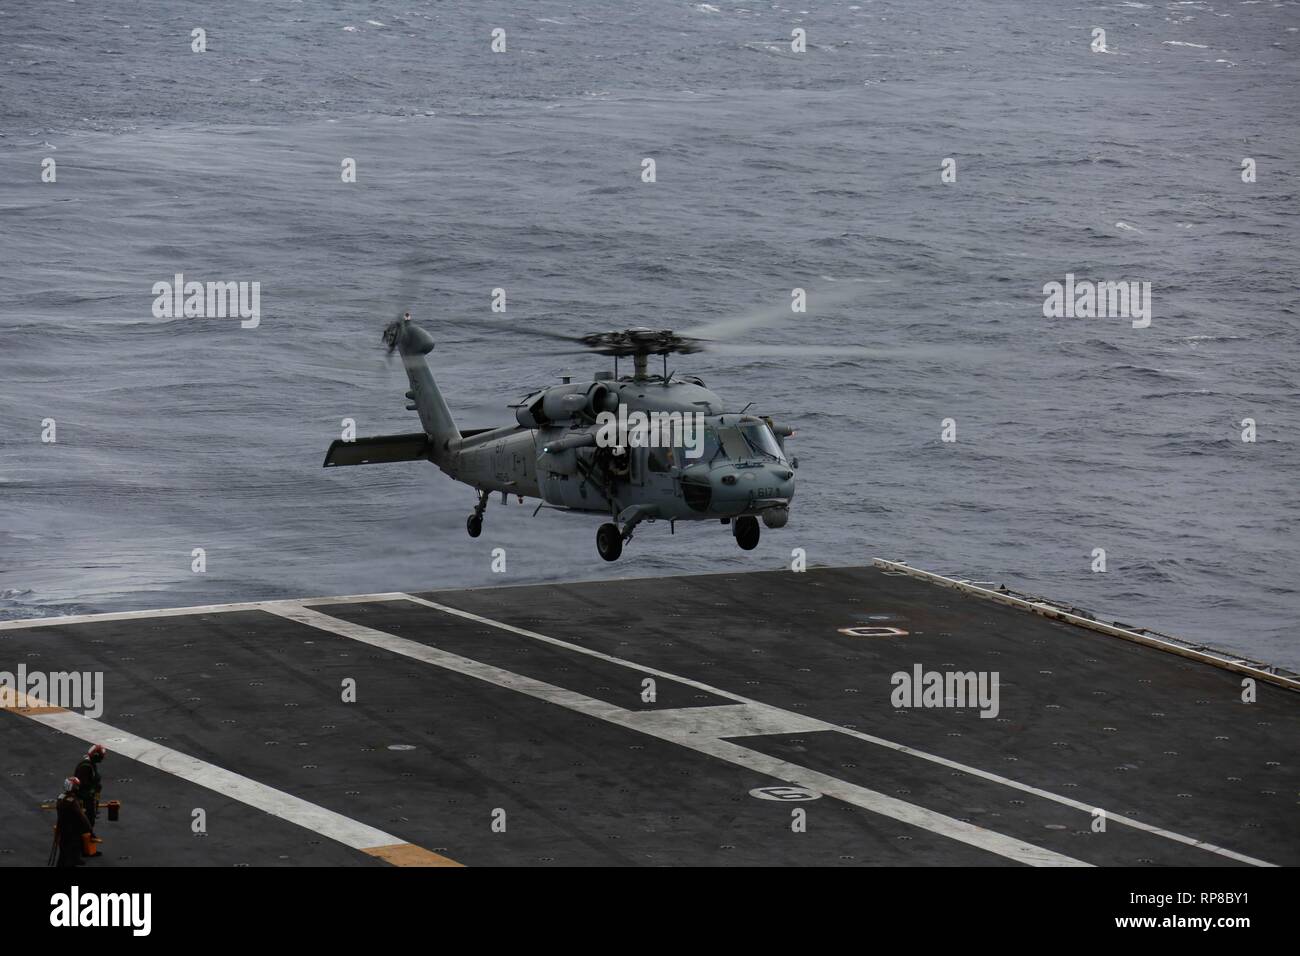 190219-N-MM912-1055 ATLANTIC OCEAN (Feb. 19, 2019) An MH-60S Sea Hawk Helicopter assigned to the "Nightdippers" of Helicopter Sea Combat  Squadron (HSC) 5 prepares to land on the flight deck of the Nimitz-class aircraft carrier USS Abraham Lincoln (CVN 72). Abraham Lincoln is underway conducting composite training unit exercise (COMPTUEX) with Carrier Strike Group (CSG) 12. The components of CSG 12 embody a team-of-teams concept, combining advanced surface, air and systems assets to create and sustain operational capability. This enables them to prepare for and conduct global operations, have  Stock Photo